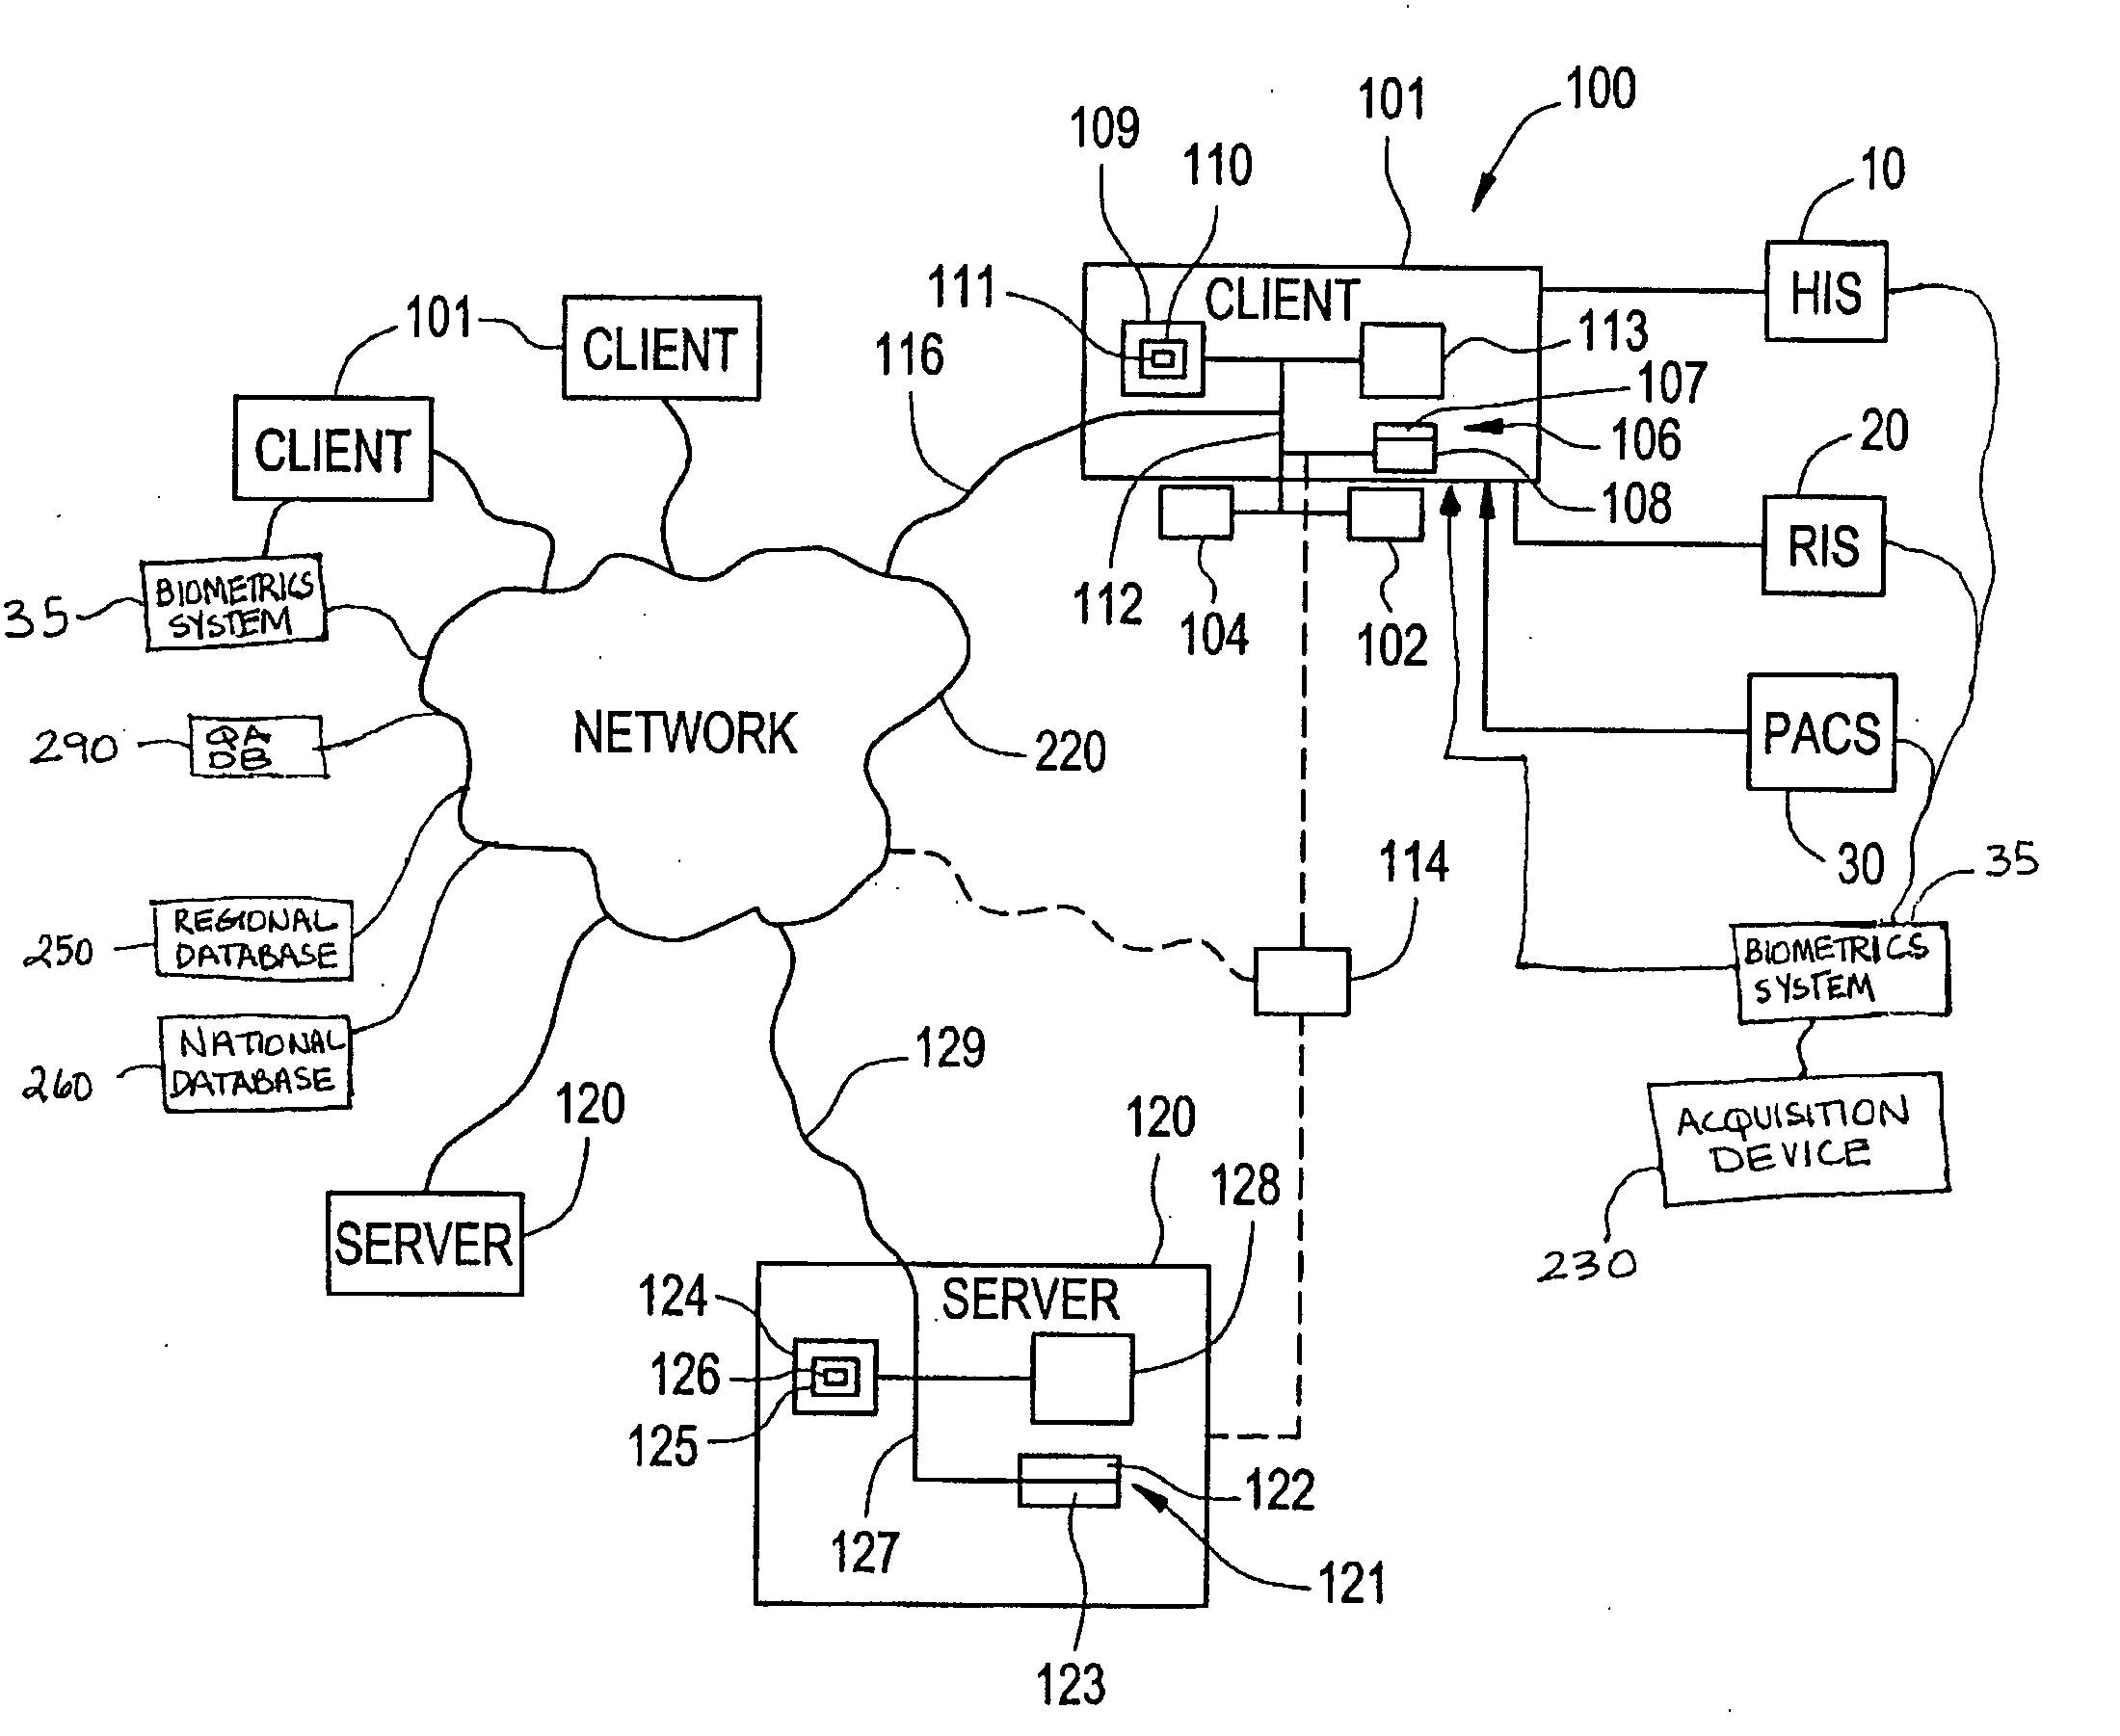 Apparatus and method for utilizing biometrics in medical applications